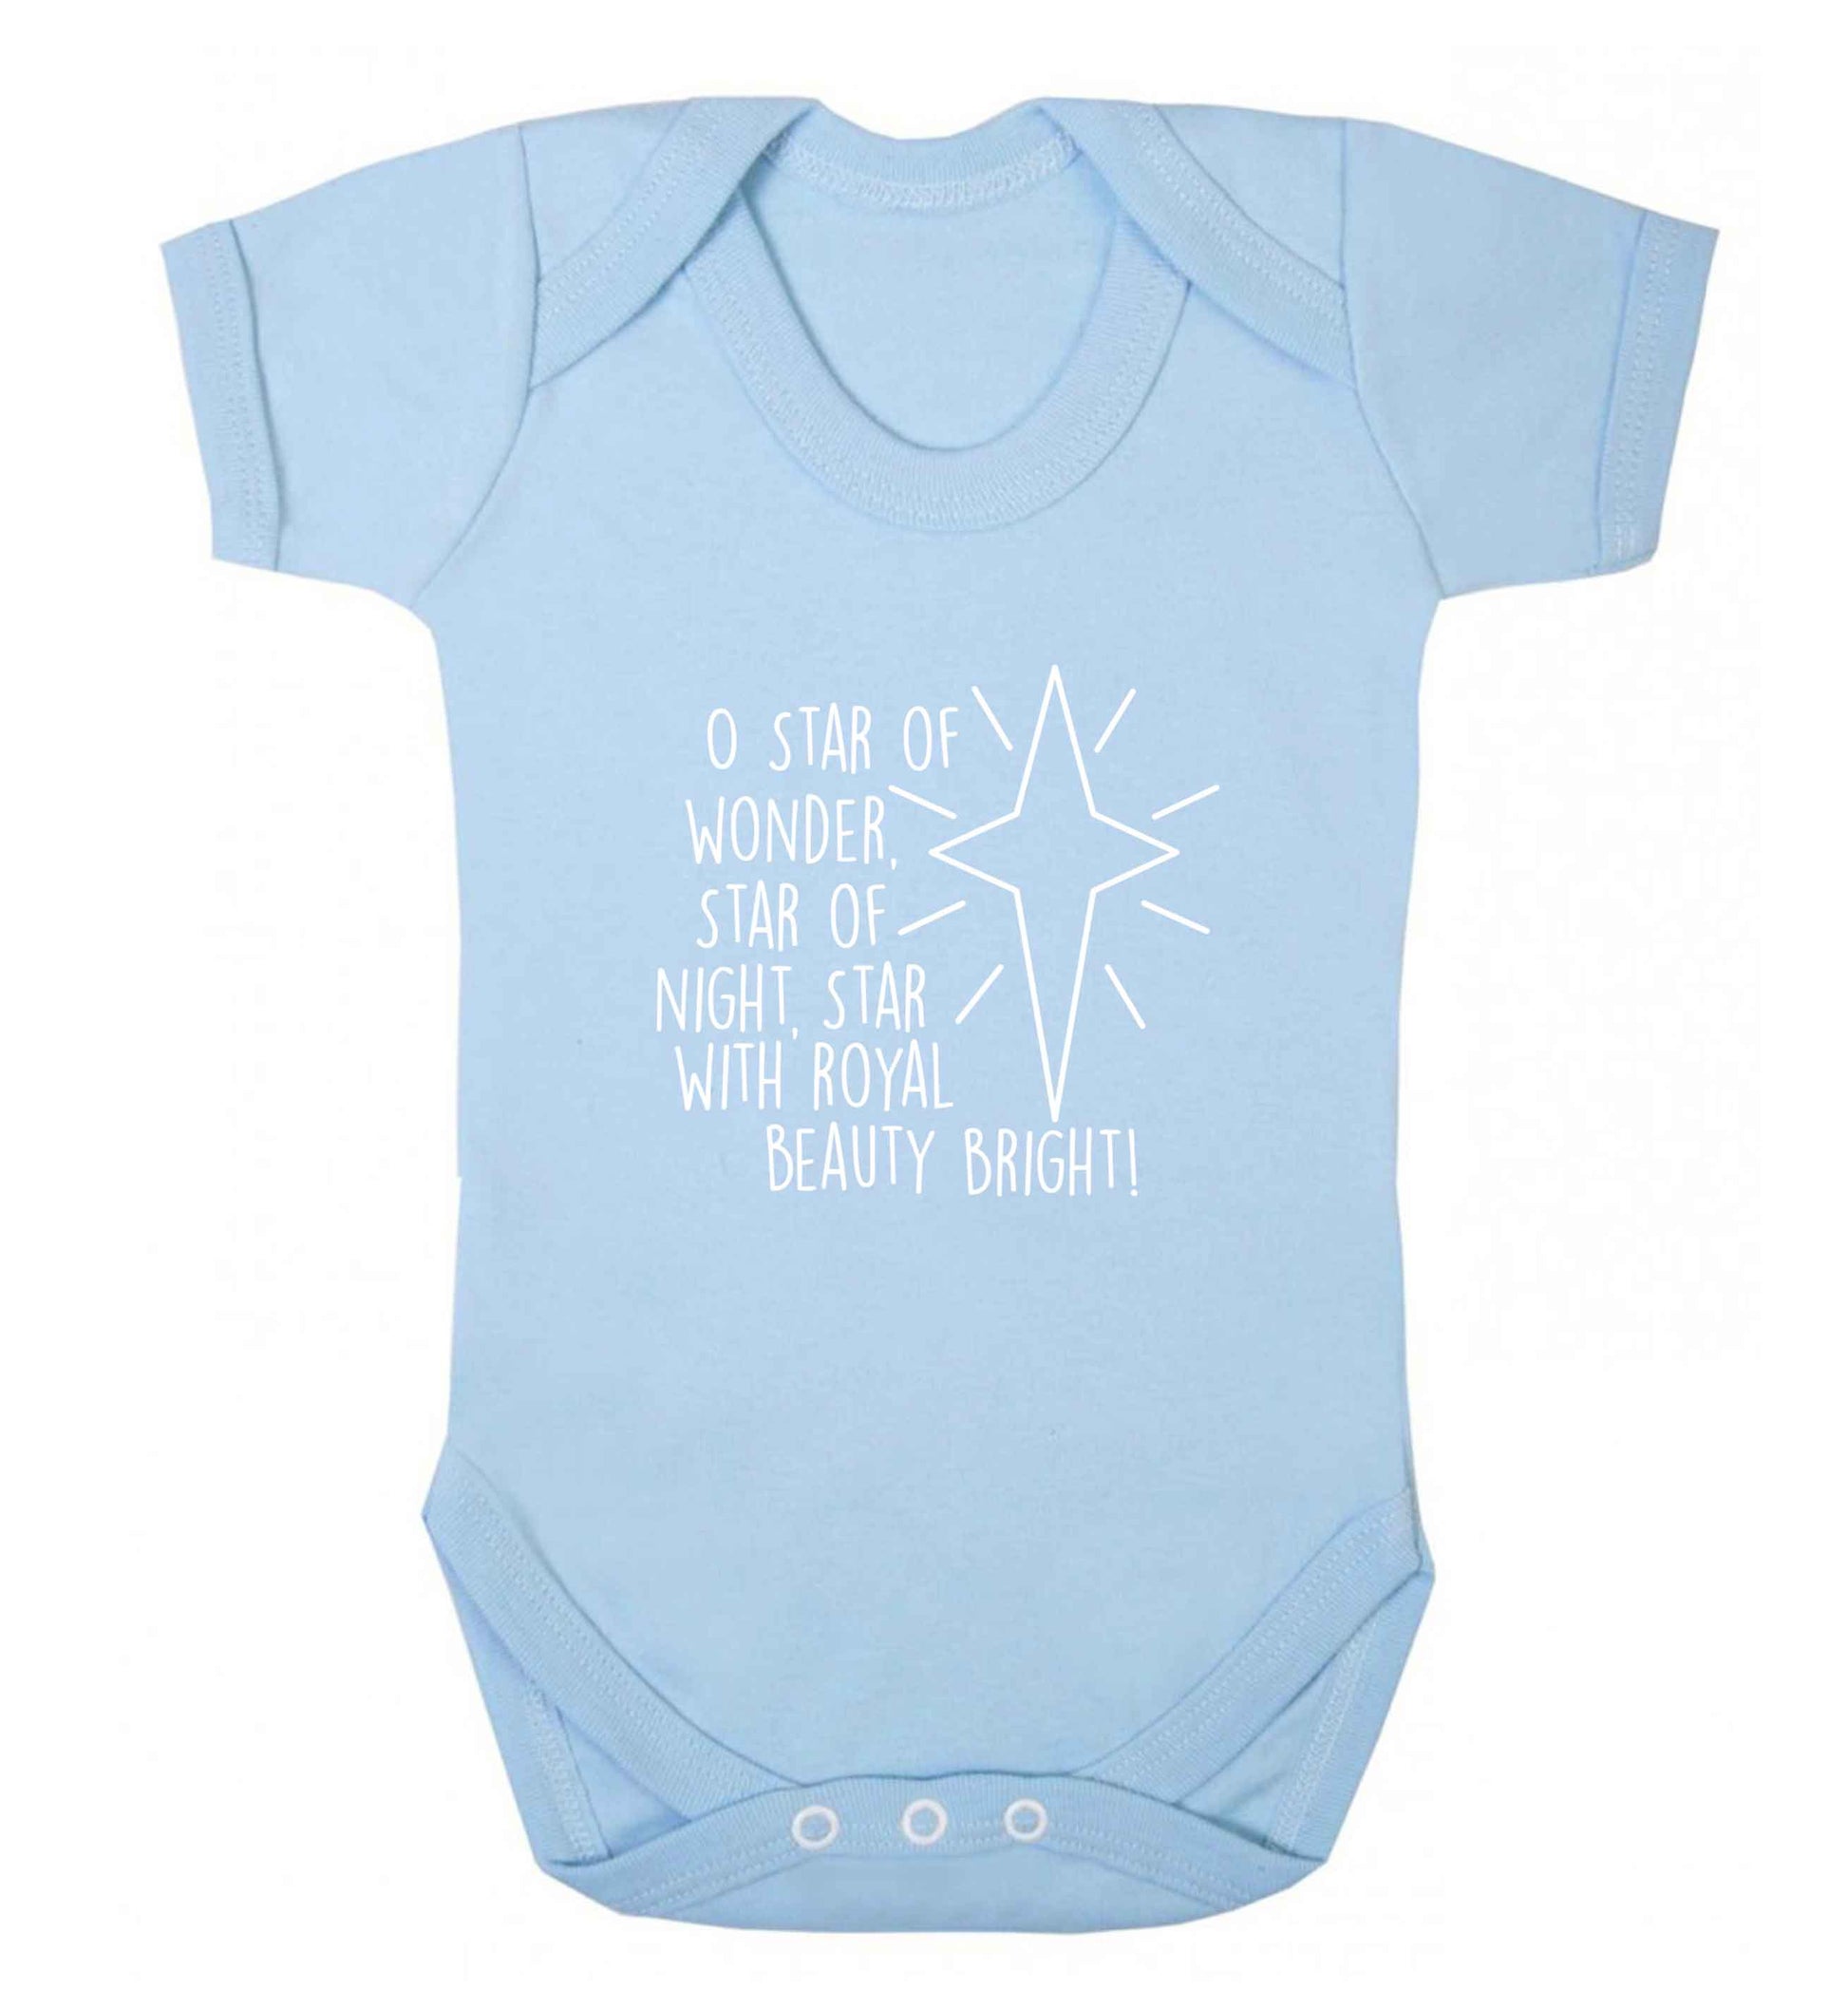 Oh star of wonder star of night, star with royal beauty bright baby vest pale blue 18-24 months